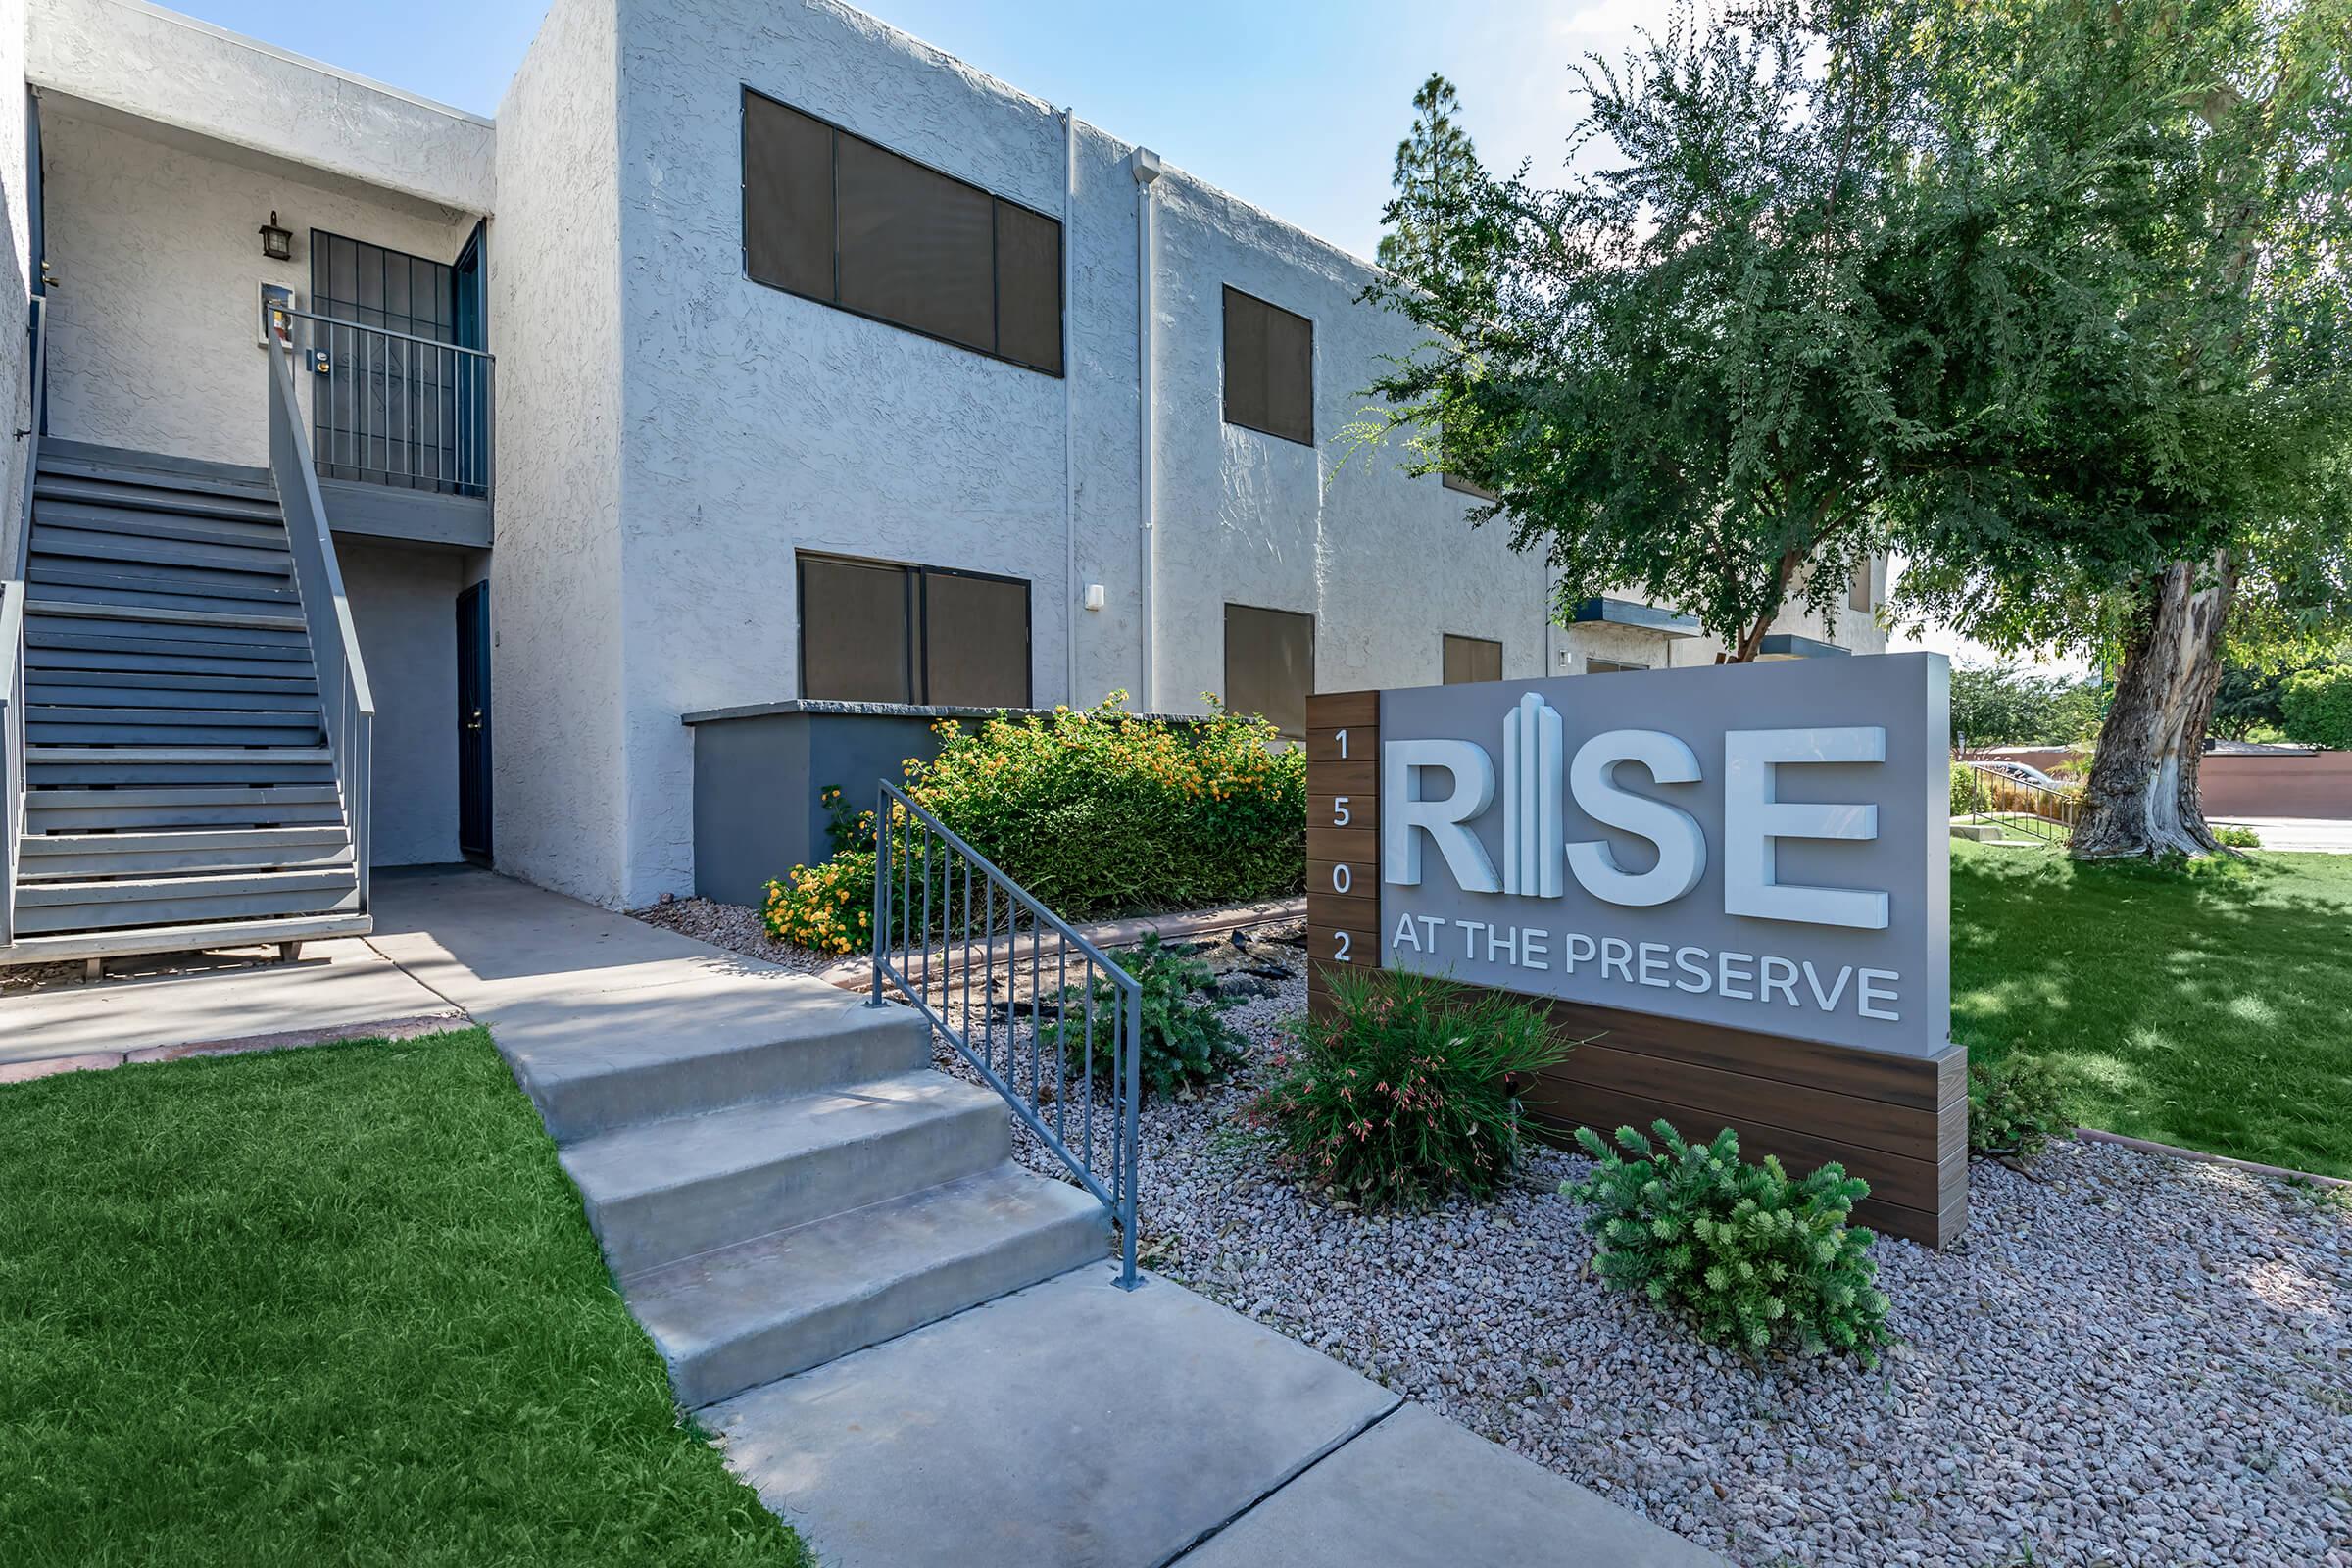 Rise at the Preserve signage outside of a large apartment building and walkway